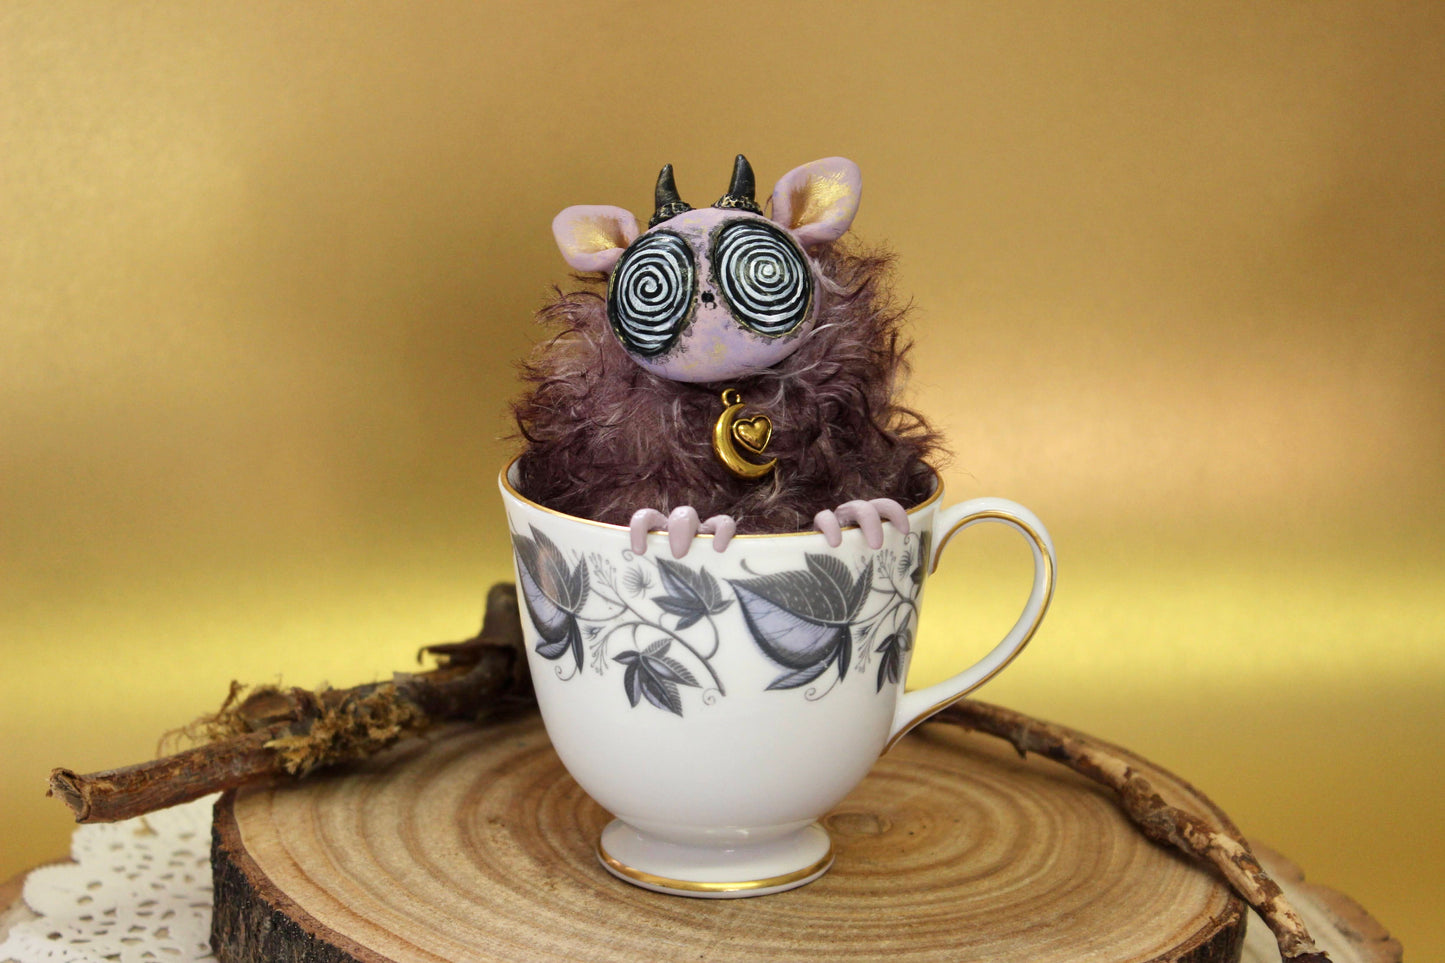 Cosmos the Teacup Critter